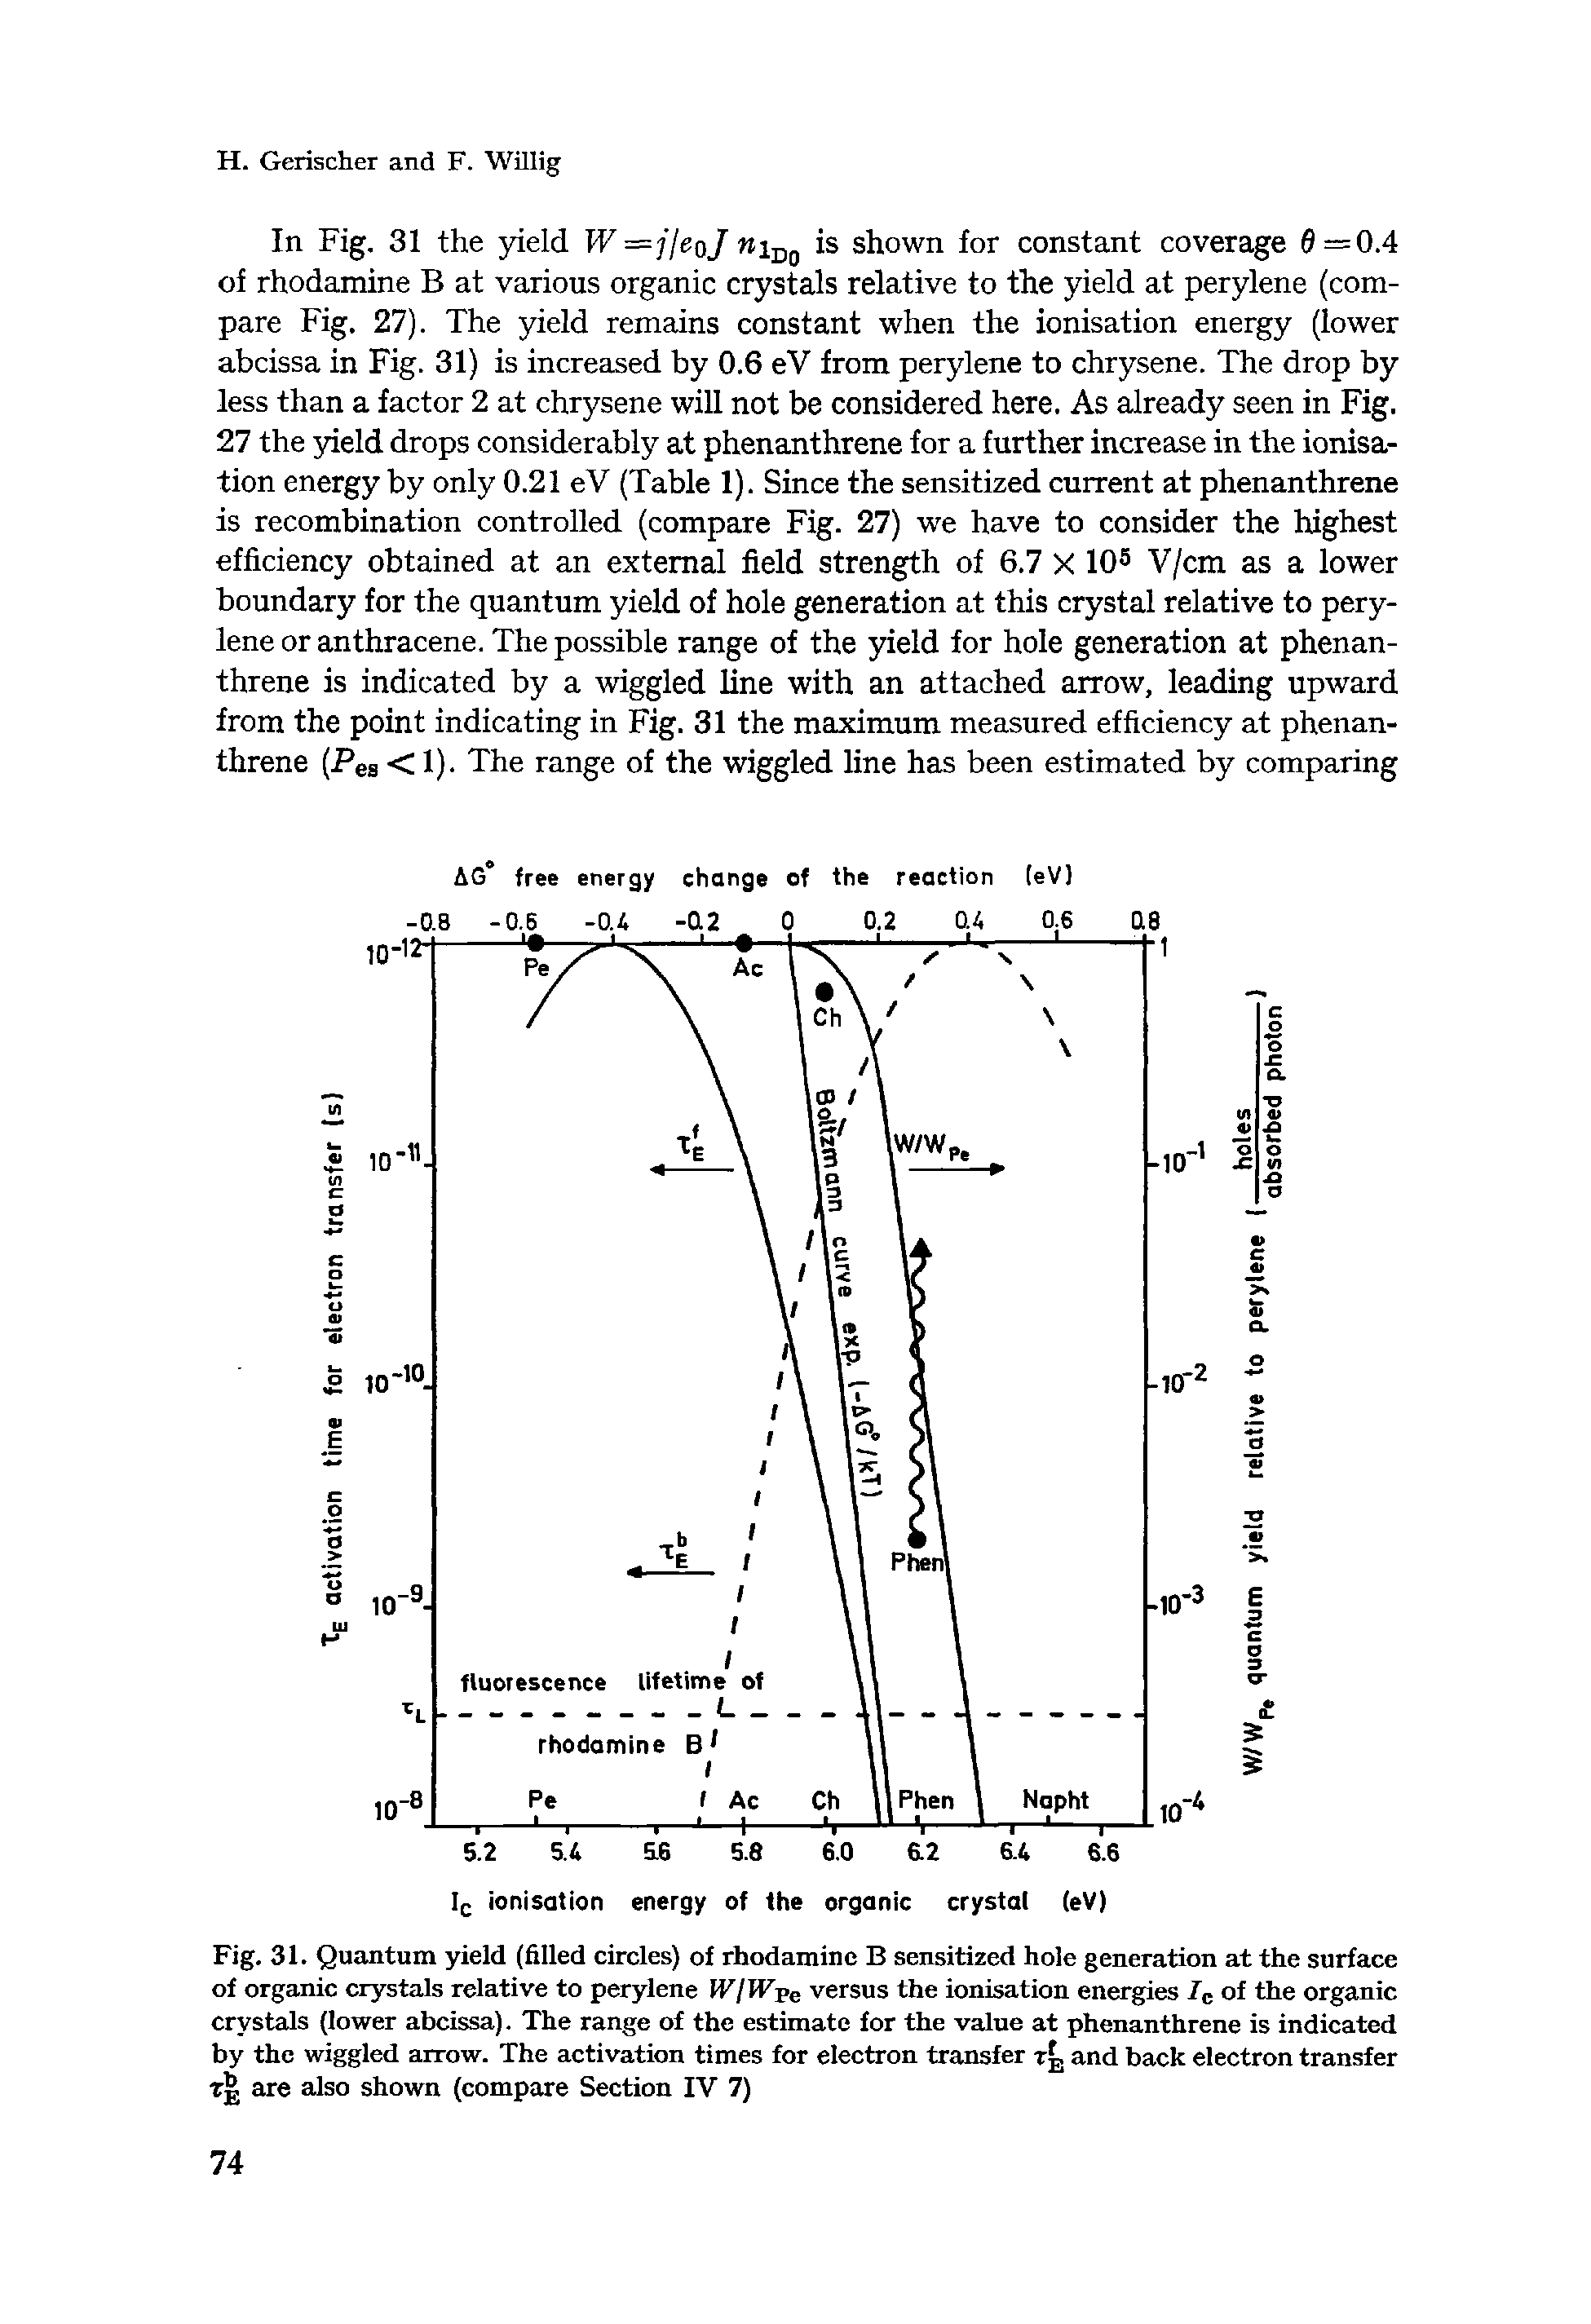 Fig. 31. Quantum yield (filled circles) of rhodamine sensitized hole generation at the surface of organic crystals relative to perylene W/Wpe versus the ionisation energies 7C of the organic crystals (lower abcissa). The range of the estimate for the value at phenanthrene is indicated by the wiggled arrow. The activation times for electron transfer and back electron transfer Tjg are also shown (compare Section IV 7)...